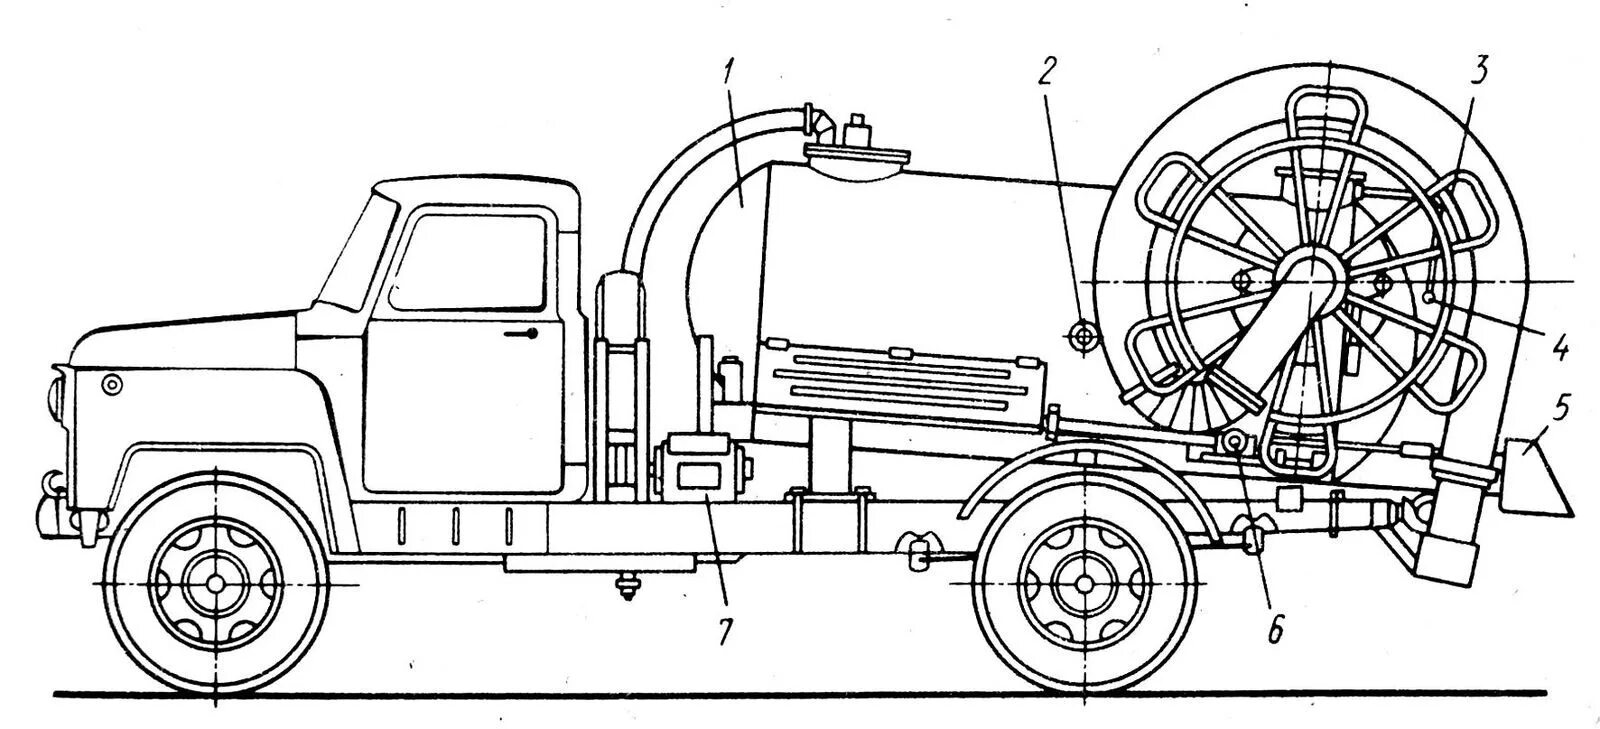 Fine sewer machine coloring page